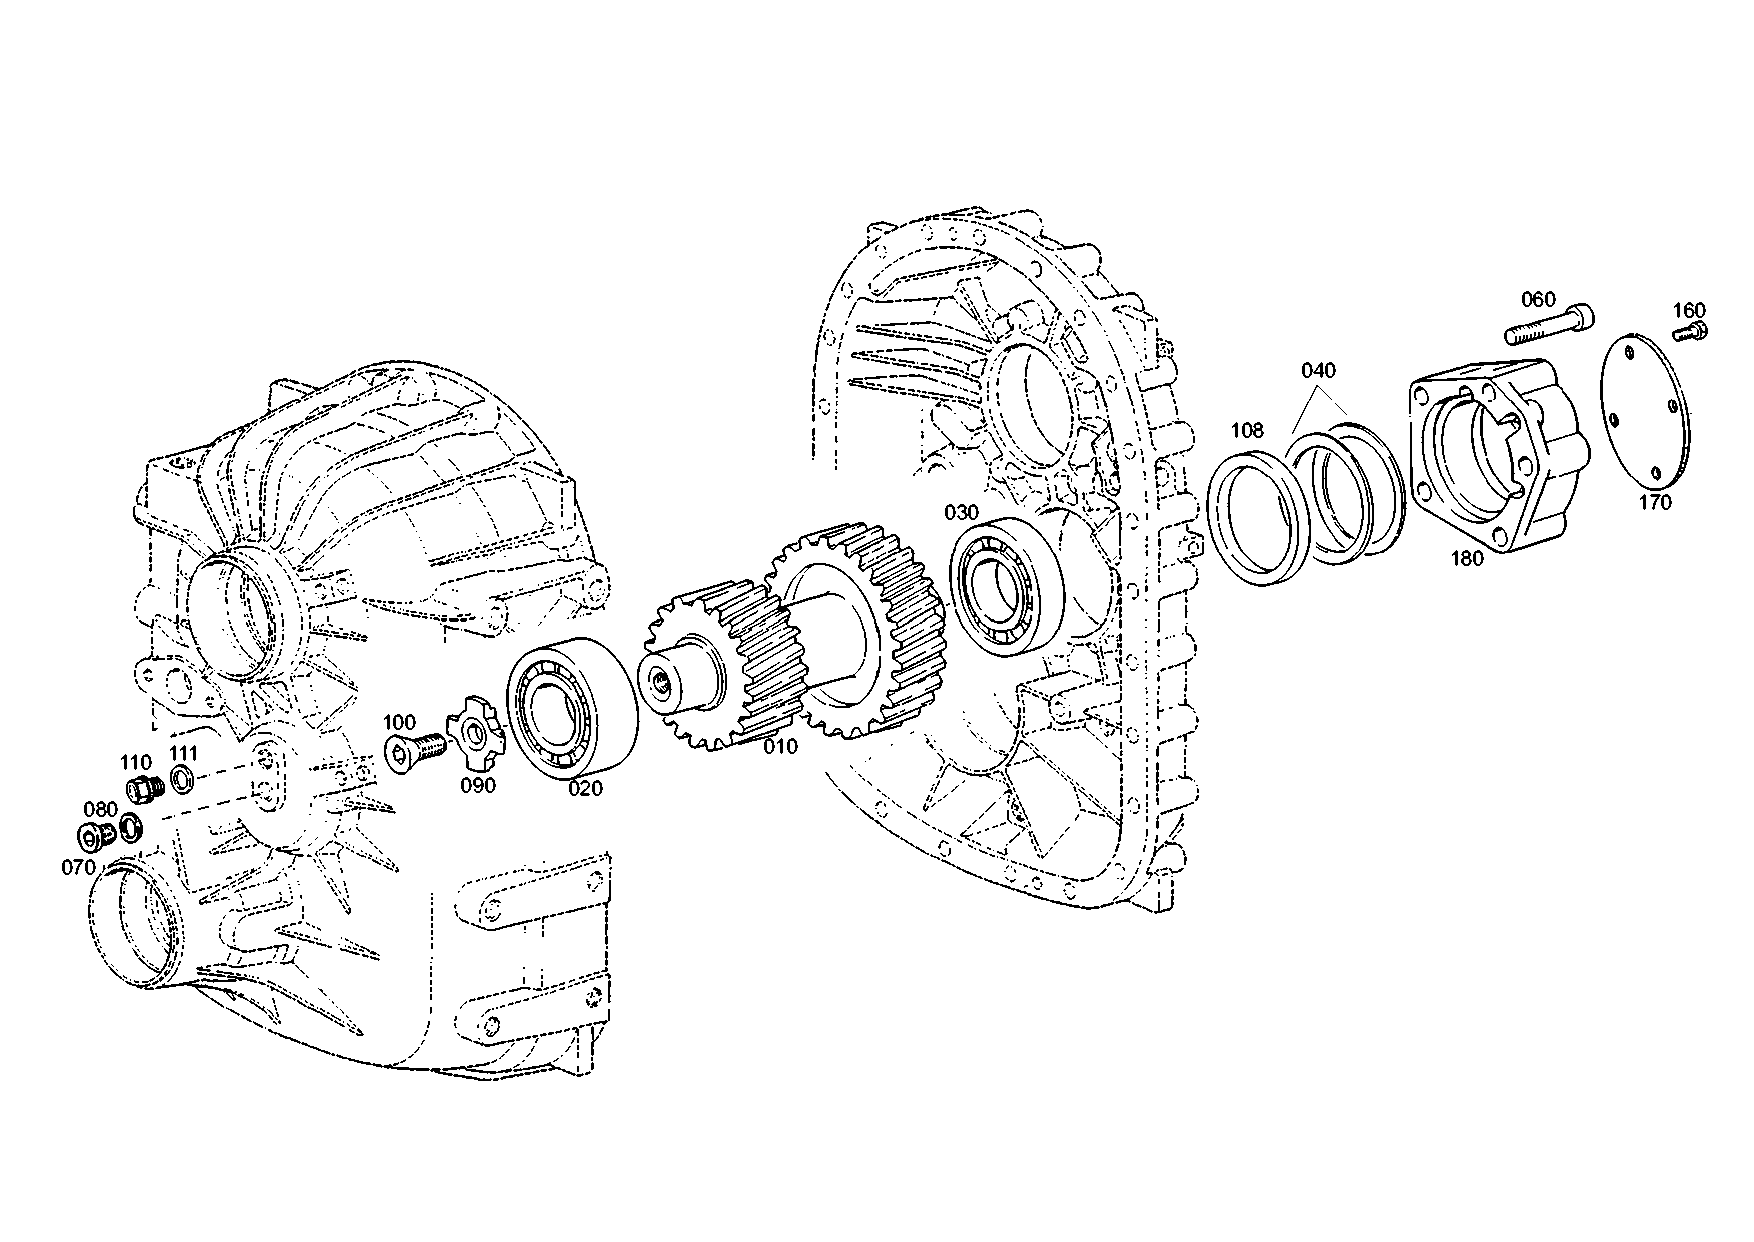 drawing for RENAULT 170750220080 - DOUBLE GEAR (figure 1)